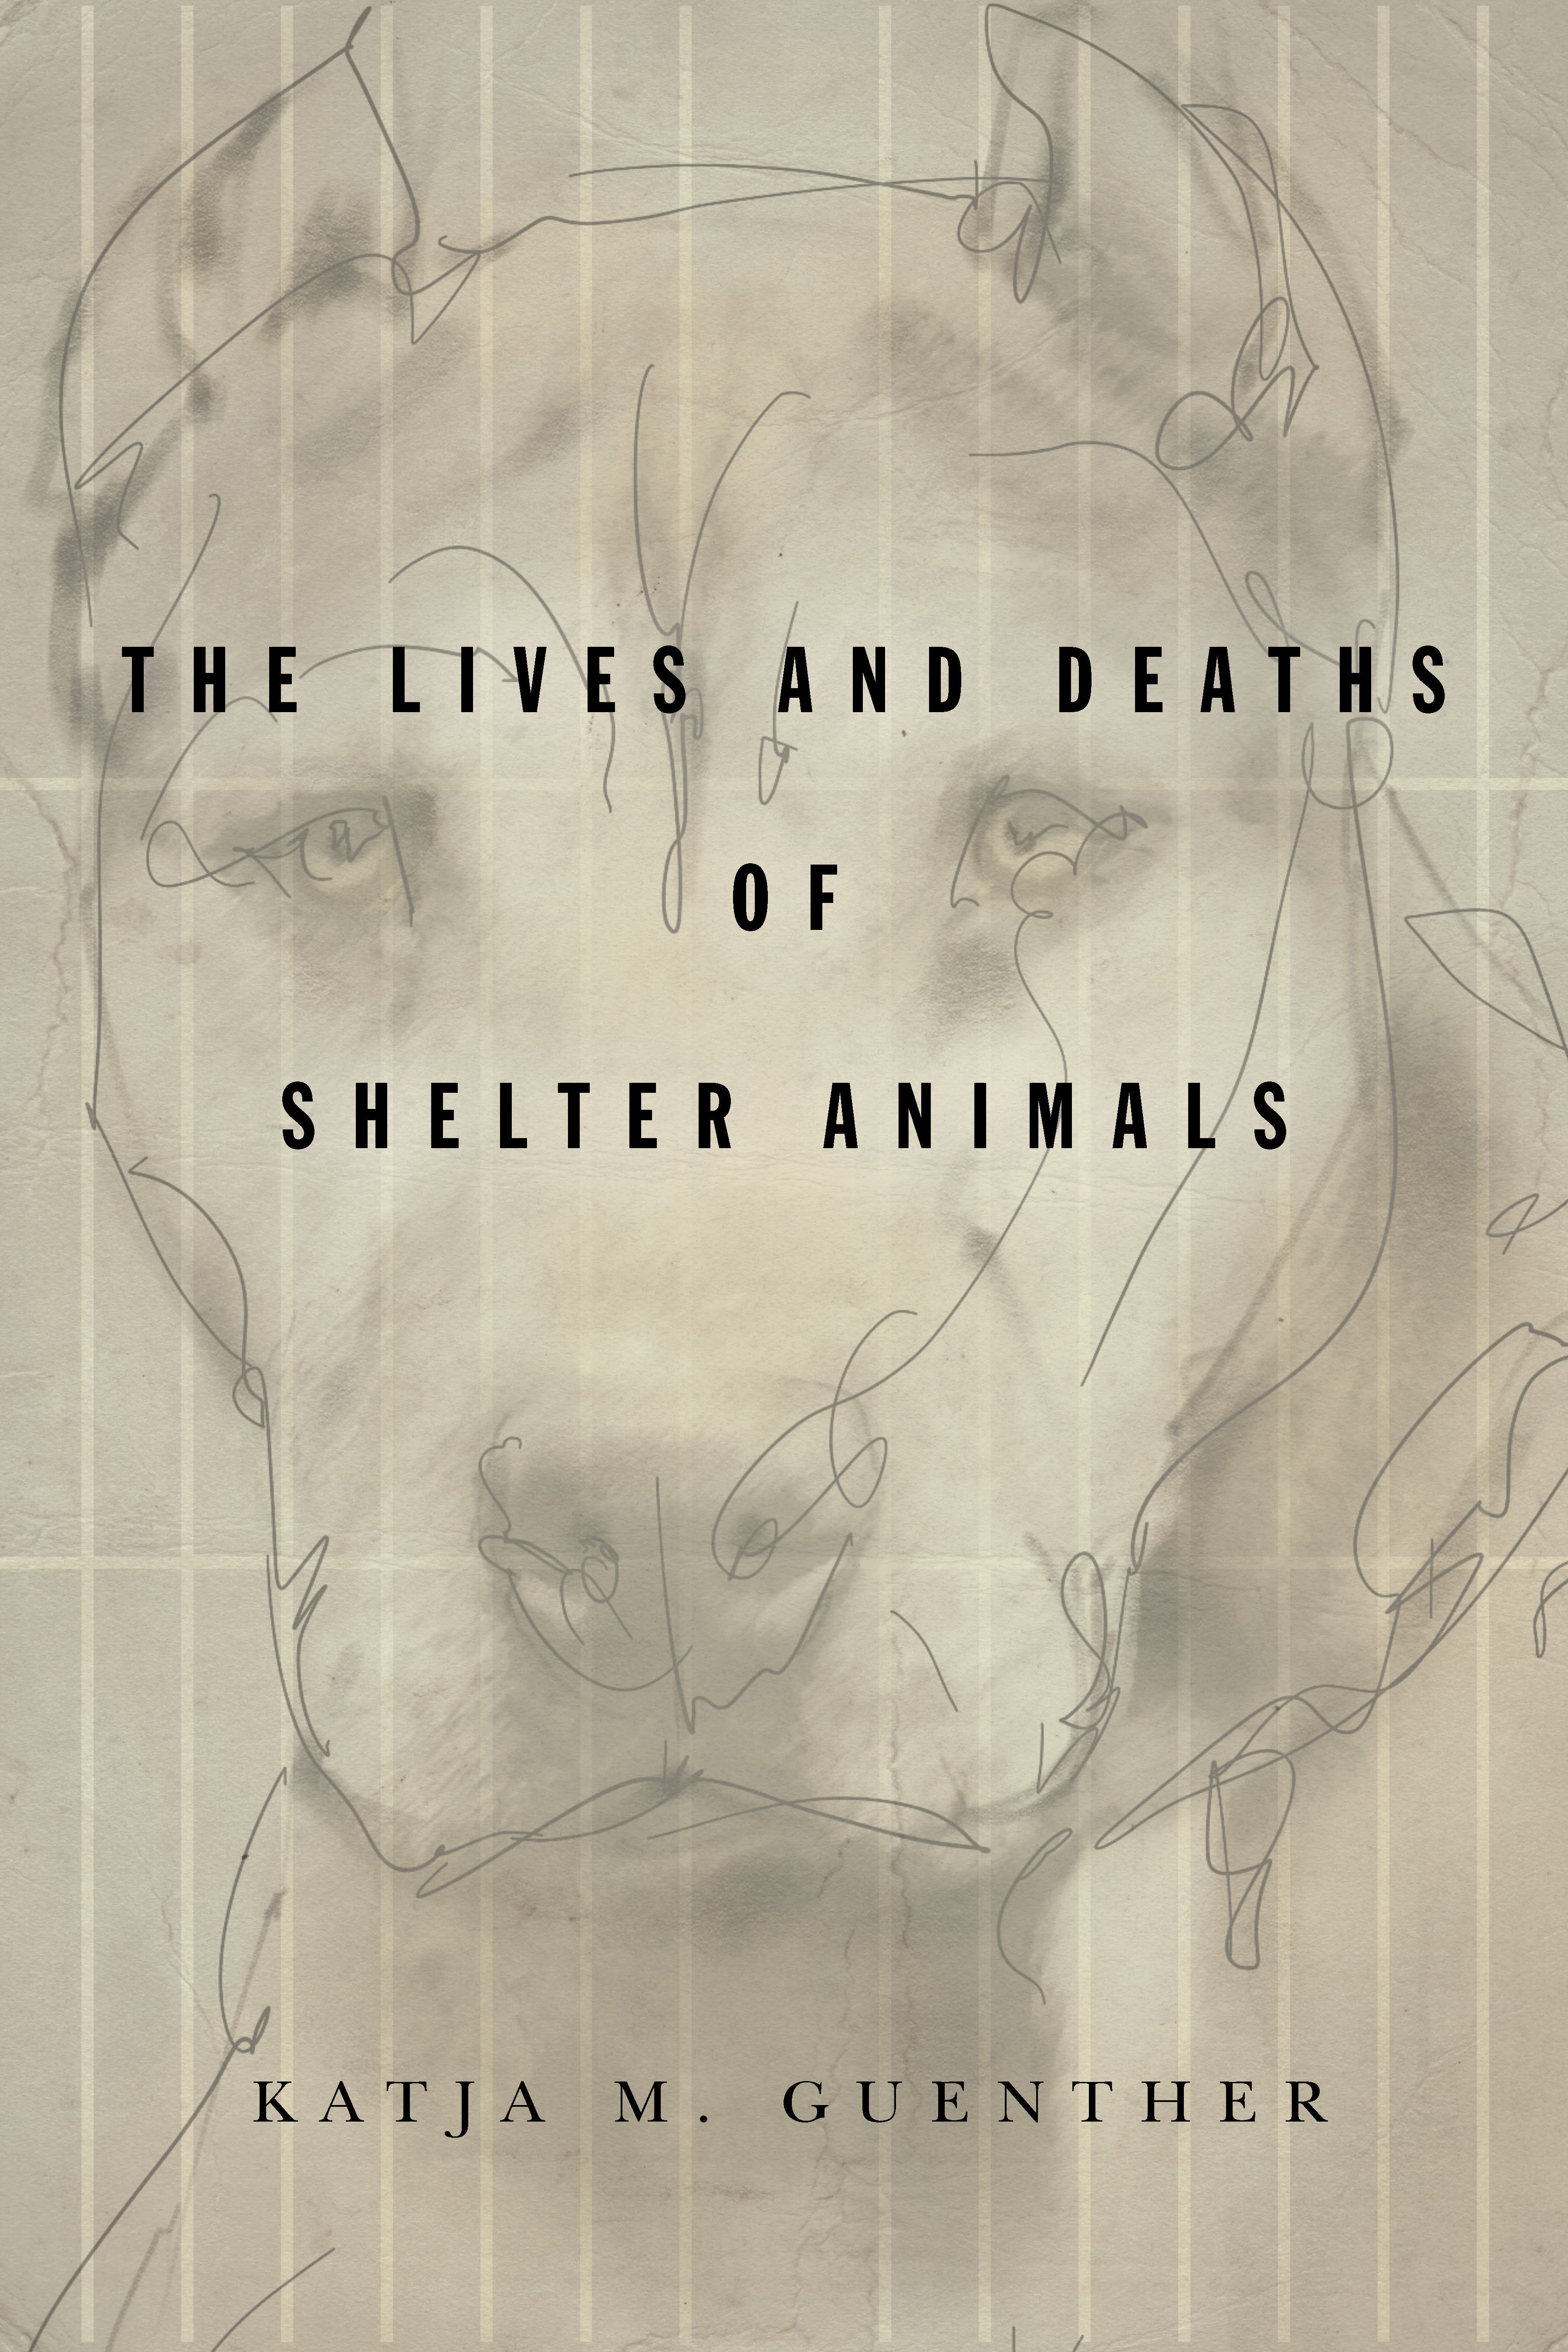 Cover of Katja M. Guenther's new book, "The Lives and Deaths of Shelter Animals," published by Stanford University Press